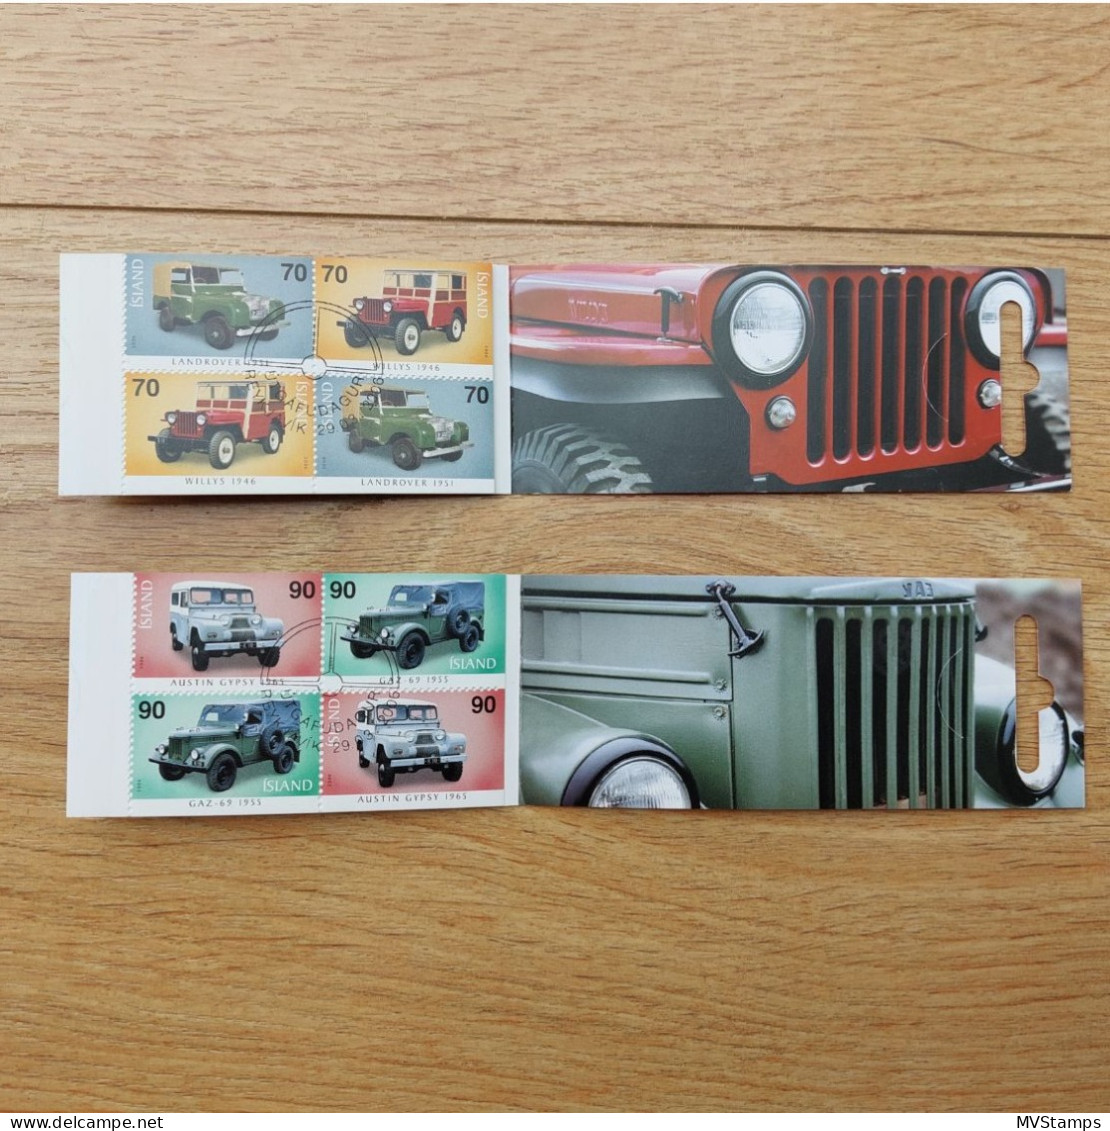 Iceland 2006 Set Stampbooklets Auto's/Cars Stamps (Michel MH 22/23) Used - Libretti